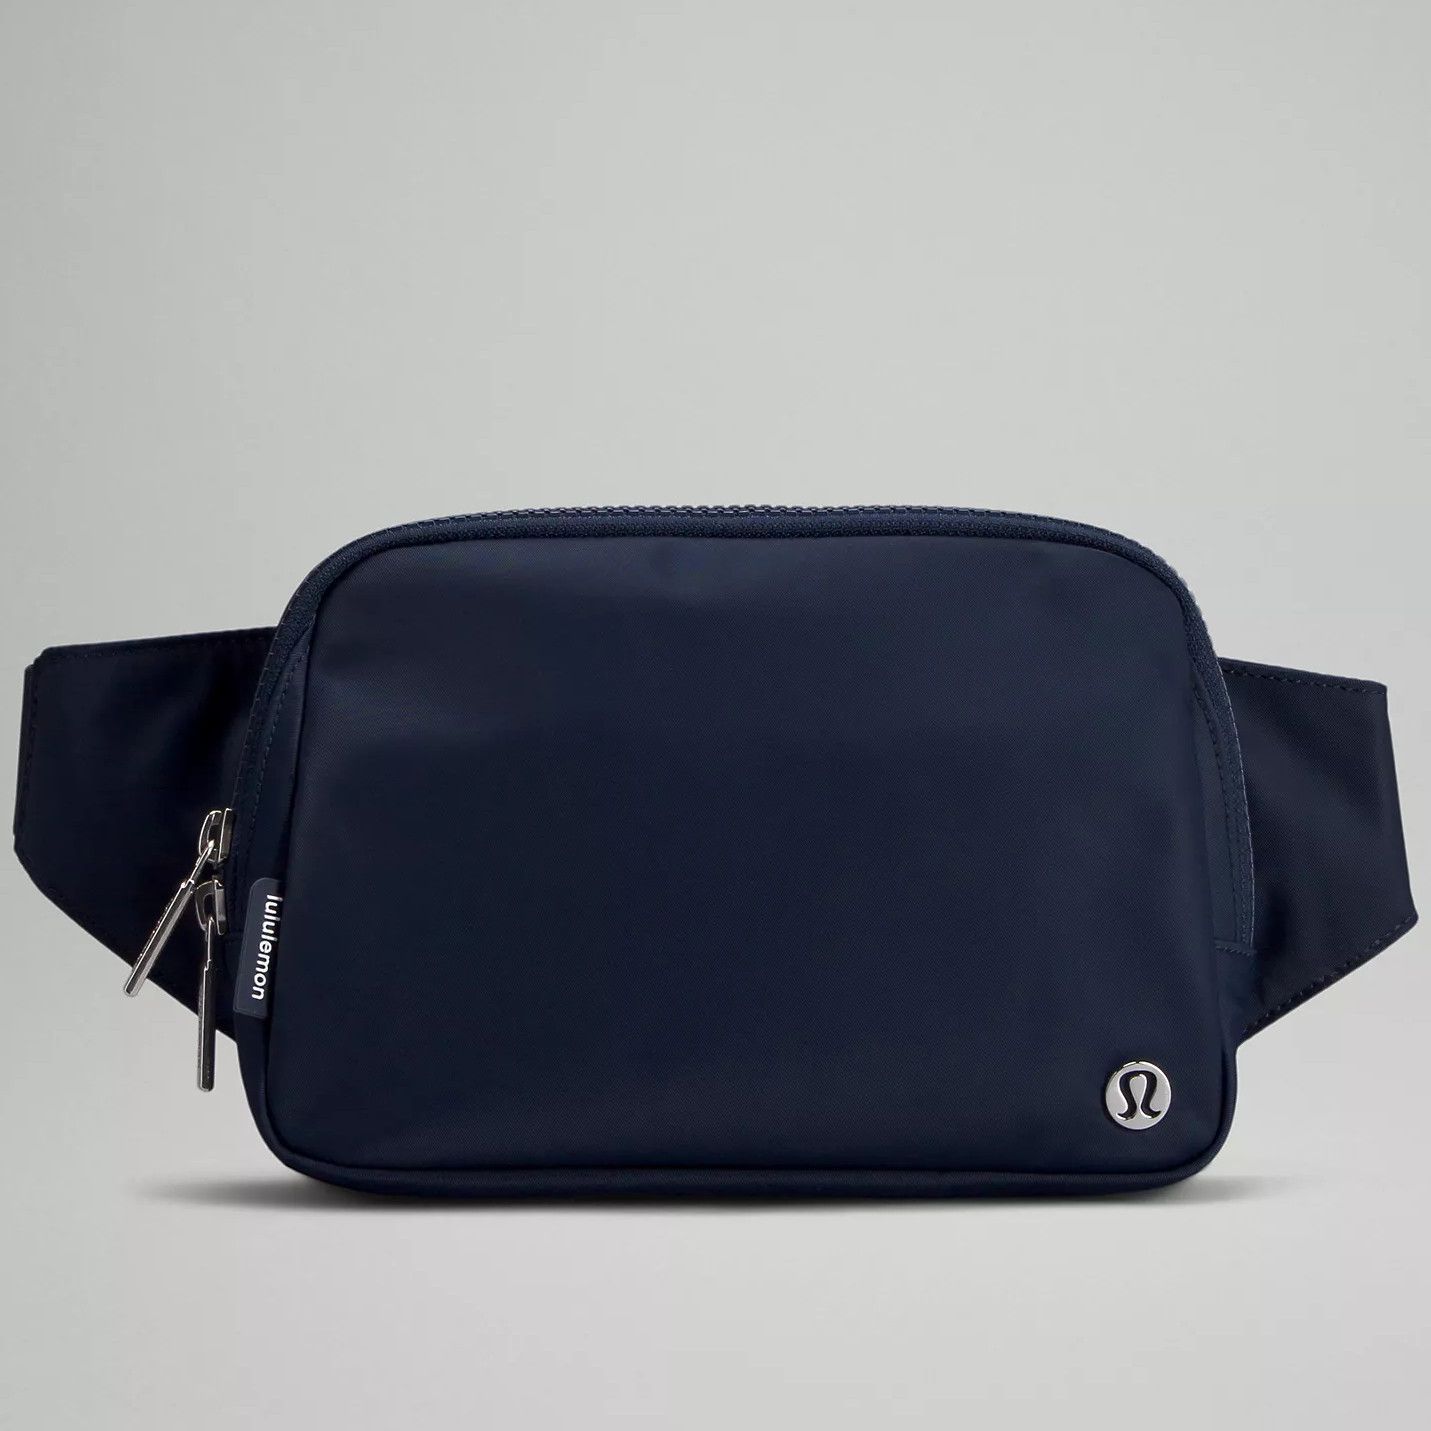 <p><strong>$48.00</strong></p><p><a href="https://go.redirectingat.com?id=74968X1553576&url=https%3A%2F%2Fshop.lululemon.com%2Fp%2Fbags%2FEverywhere-Belt-Bag-Large%2F_%2Fprod11130156&sref=https%3A%2F%2Fwww.menshealth.com%2Fstyle%2Fg45419200%2Fbest-fanny-packs%2F">Shop Now</a></p><p>Simple, sleek, and available in over a dozen colors, Lululemon makes a perfect fanny pack for all your EDC needs. The main 2L pouch has a double two-way zipper that opens 3/4 of the way to easily get things in and out. Gusseted flaps prevent items from falling out when you unzip all the way. A mesh inner sleeve provides extra organization. There is a discreet smaller pocket tucked into the back with a single zipper. That makes is ideal for hiding cash, cards, and other small valuables. </p><p>The 100% nylon exterior is water resistant, in case you get stuck out in the rain. Wear it equally well around your waist or across your body. While it only comes in solid colors, you can either go with a subtle taupe, black, or navy; or you can get bold with violet, orange, or powder blue. Whatever color choice best matches your personality is the way to go.</p><p>Our editors love this bag for its overall versatility. The Everywhere <a href="https://www.menshealth.com/style/g33403084/best-mens-belts/">Belt</a> Bag is compact and lightweight enough to wear under a jacket, but has plenty of cargo room for all your stuff. It works well as an every-day bag or as a travel bag, which is small enough to be a second <a href="https://www.menshealth.com/style/g19539437/best-carry-on-luggage/">carry-on bag</a> when you fly. </p>